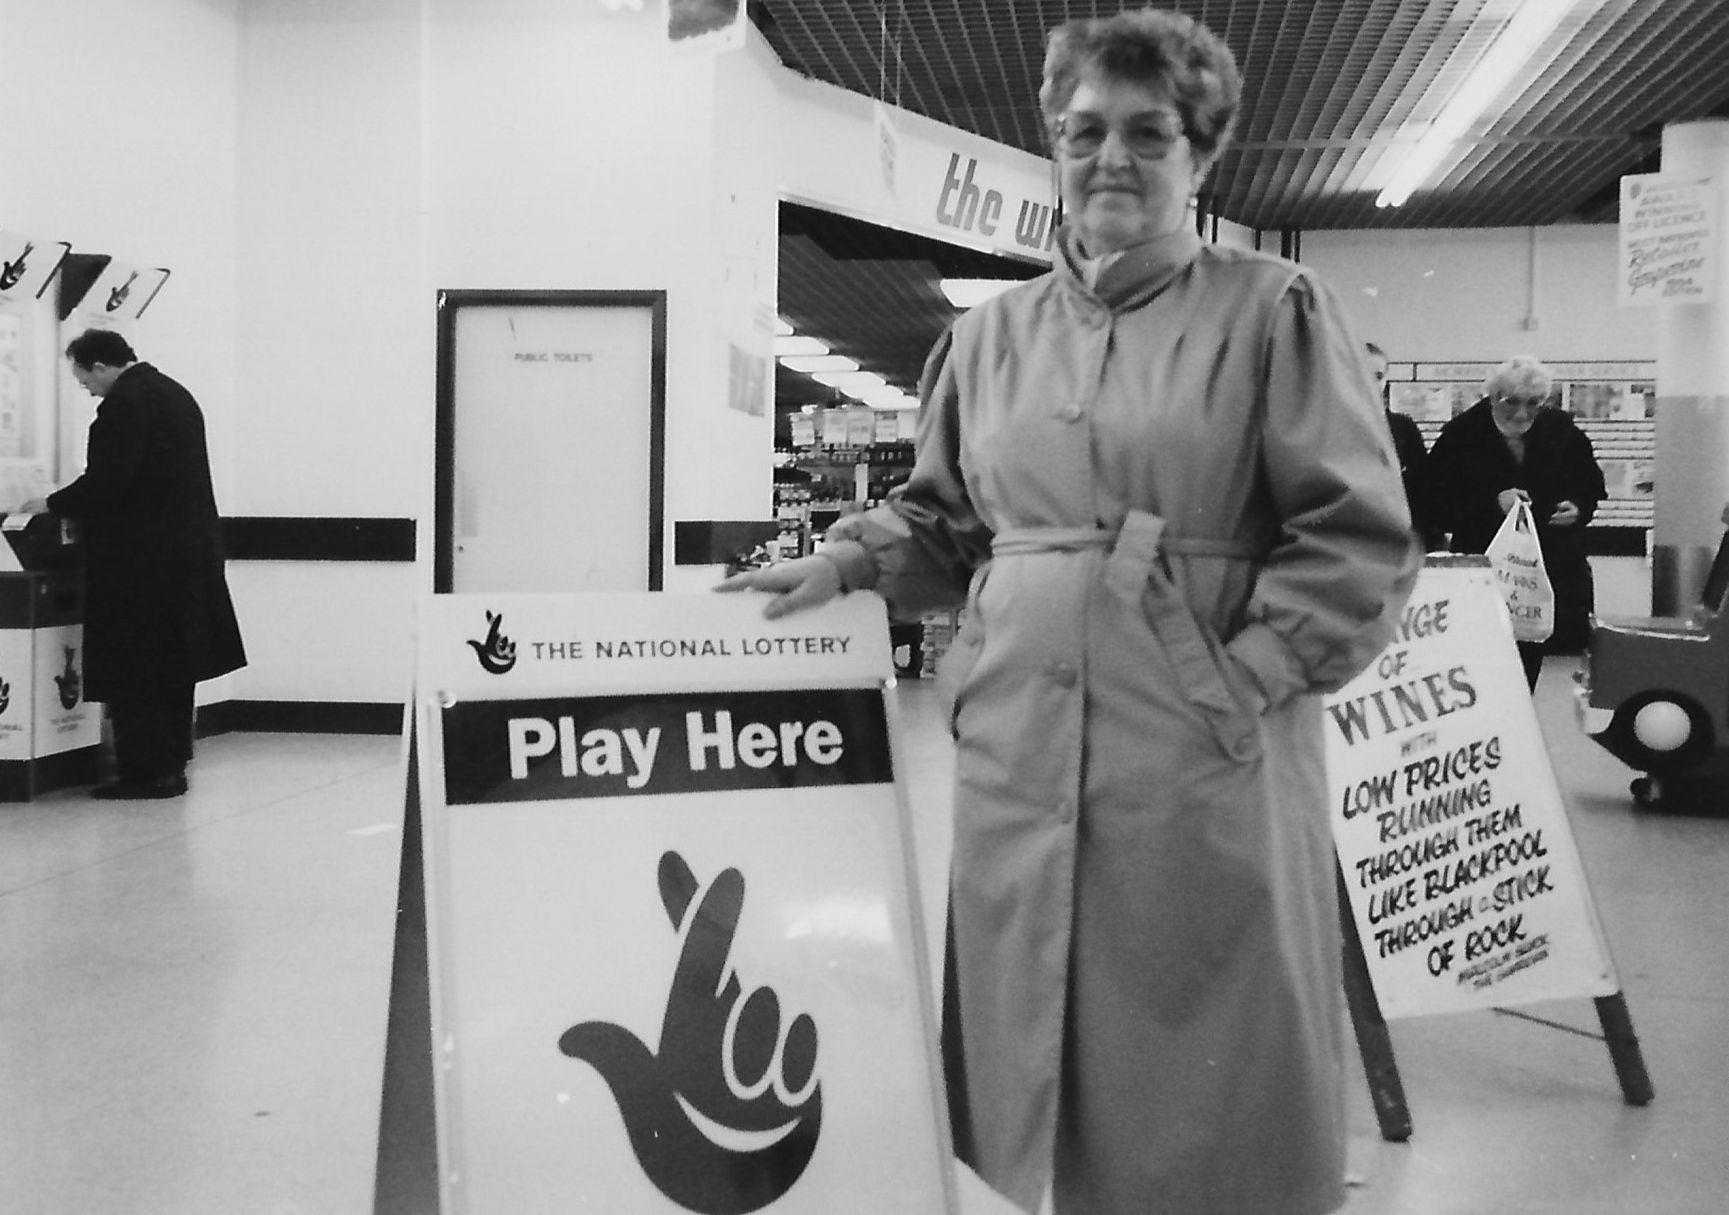 Southport in November 1994. A lady promotes the National Lottery in the former supermarket on Tulketh Street in Southport. The store changed from Mainstop to Morrisons. A sign in the background says 'range of wines with low prices running through them like Blackpool through a stick of rock'